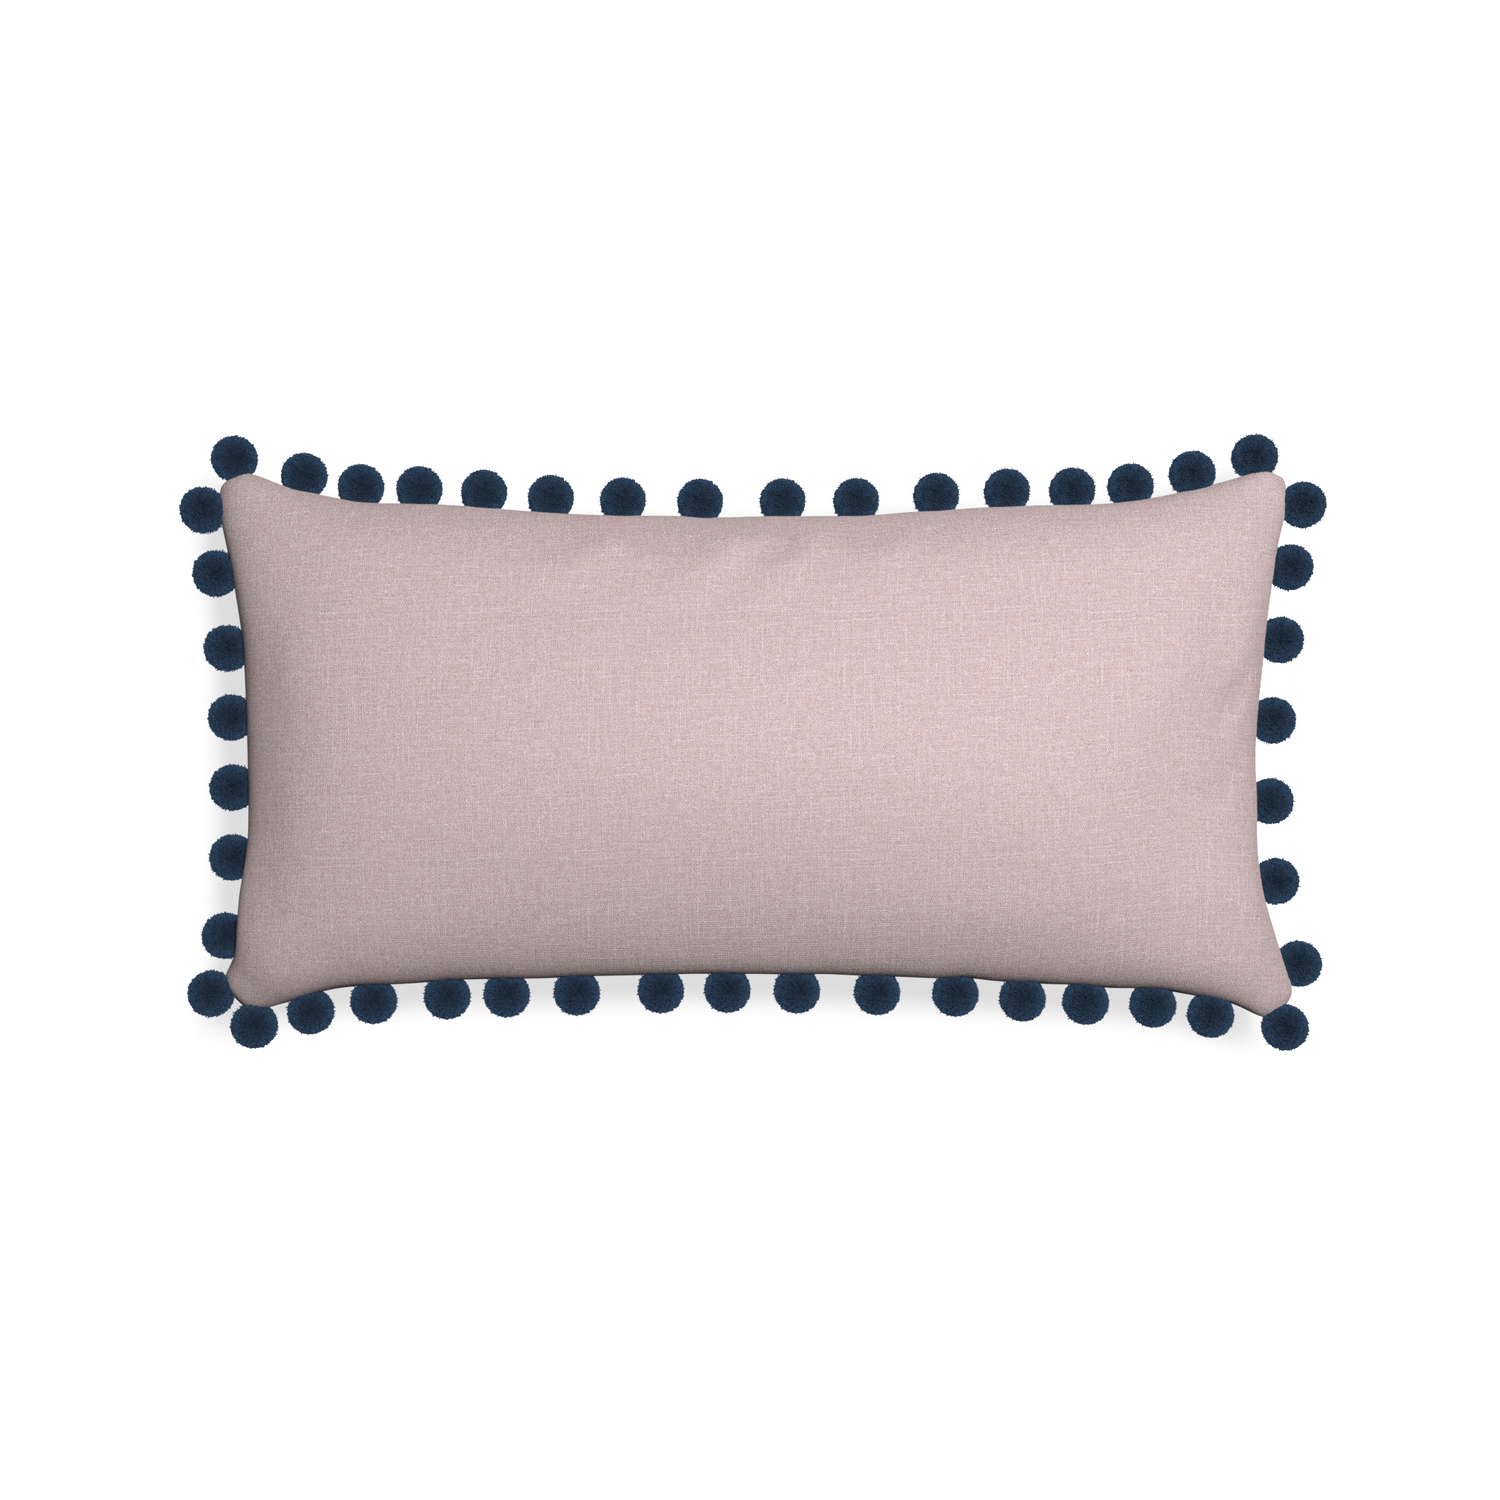 Midi-lumbar orchid custom mauve pinkpillow with c on white background